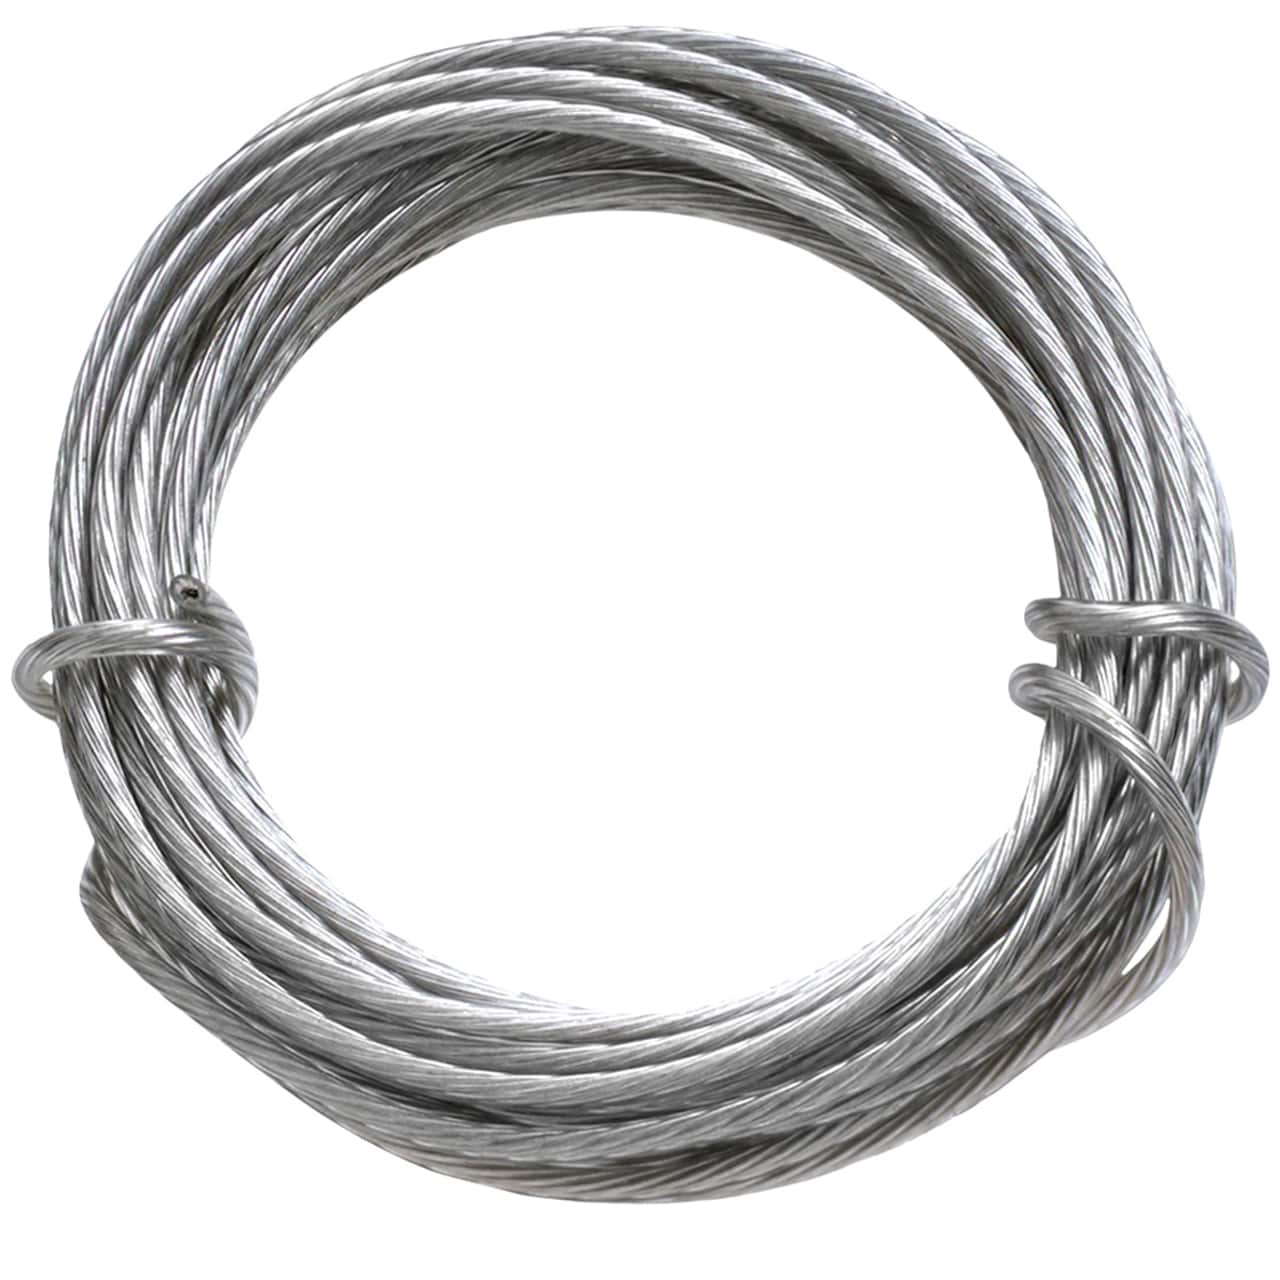 24 Pack: Professional Coated Picture Hanging Wire